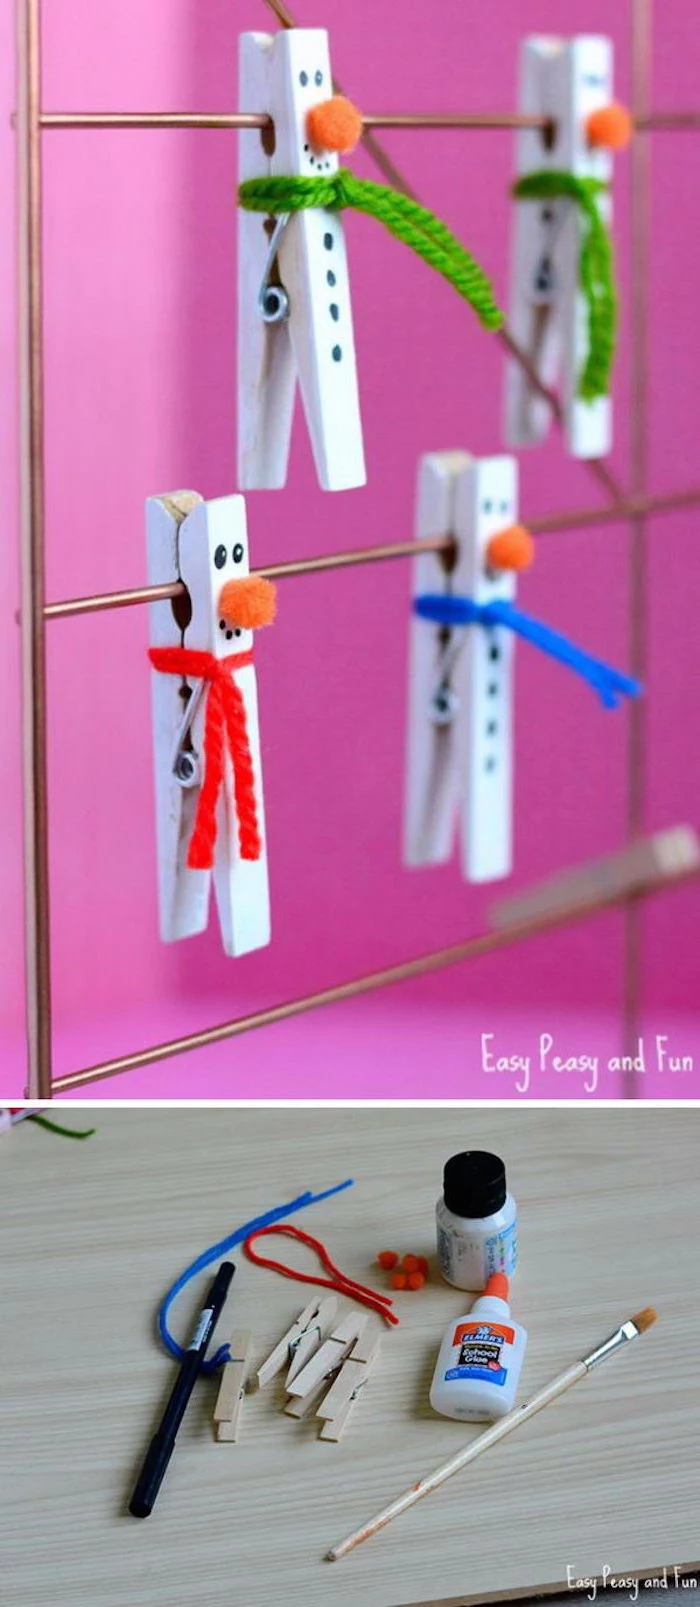 diy ornaments for kids, clothespins turned into snowmen, painted in white, yarn used for scarfs, hanging on metal rail